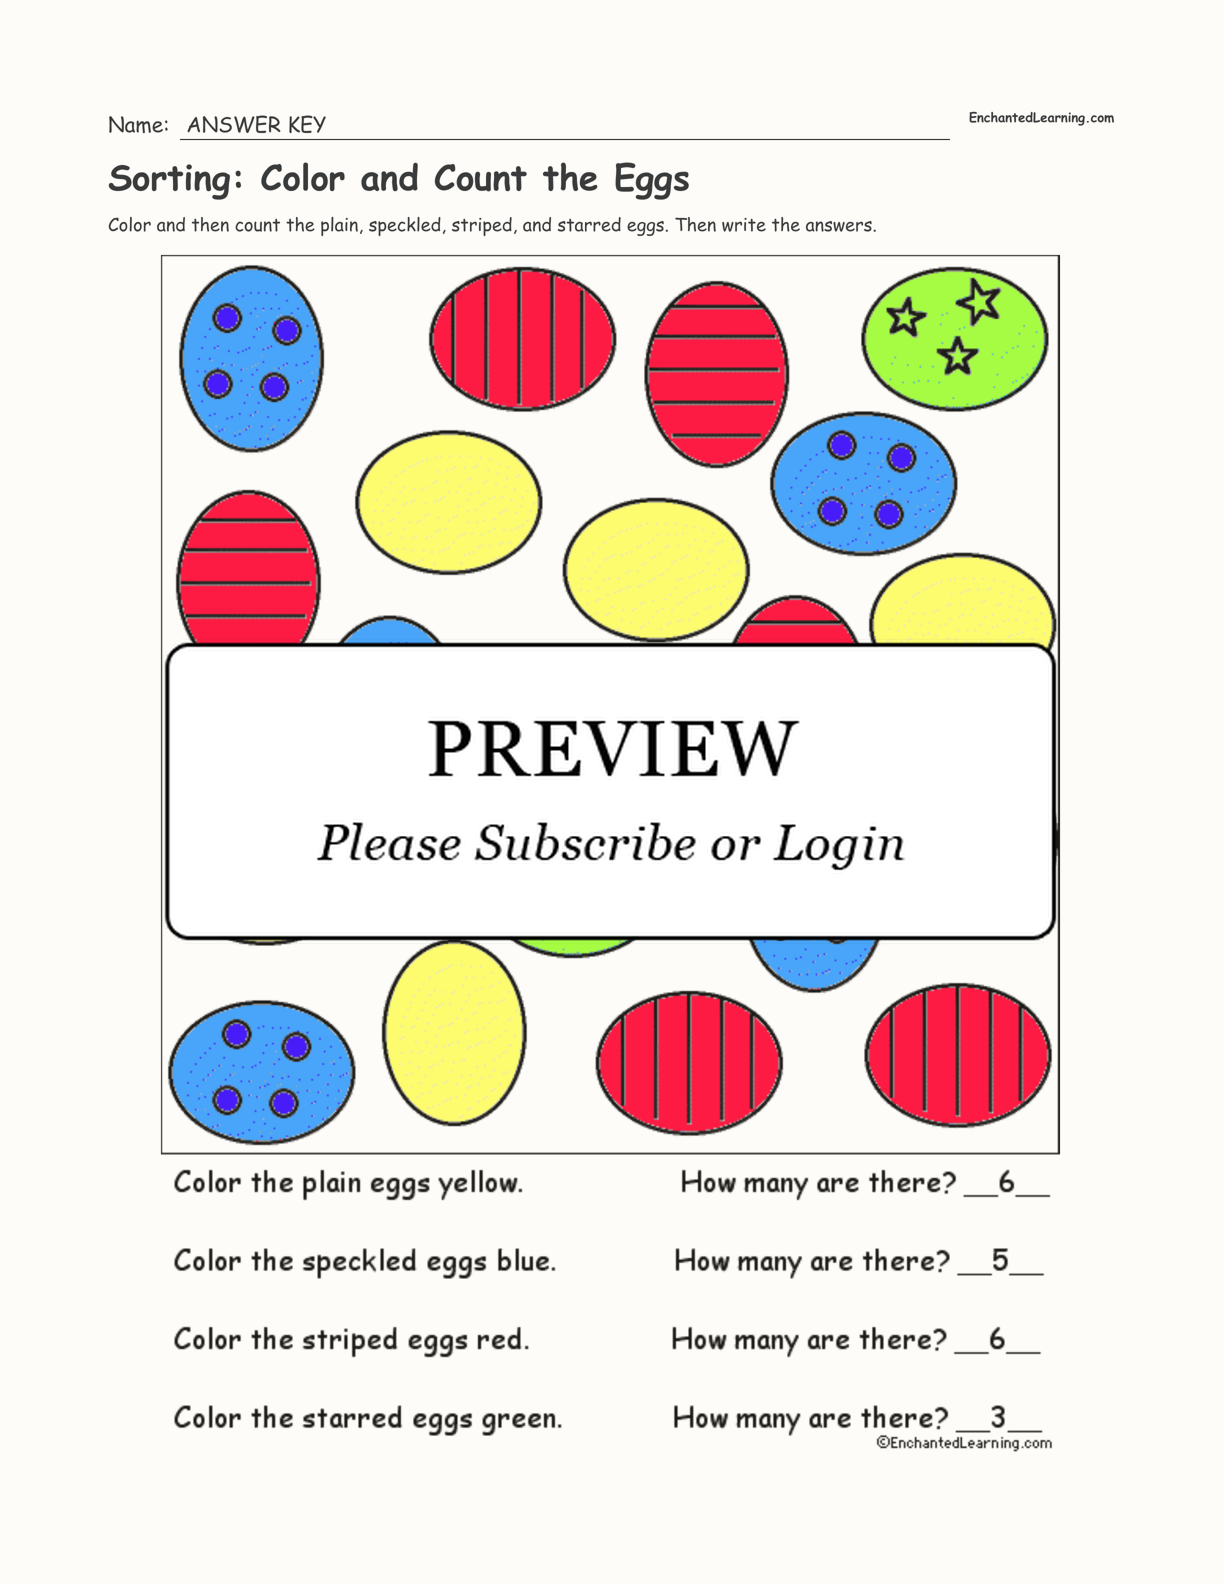 Sorting: Color and Count the Eggs interactive worksheet page 2